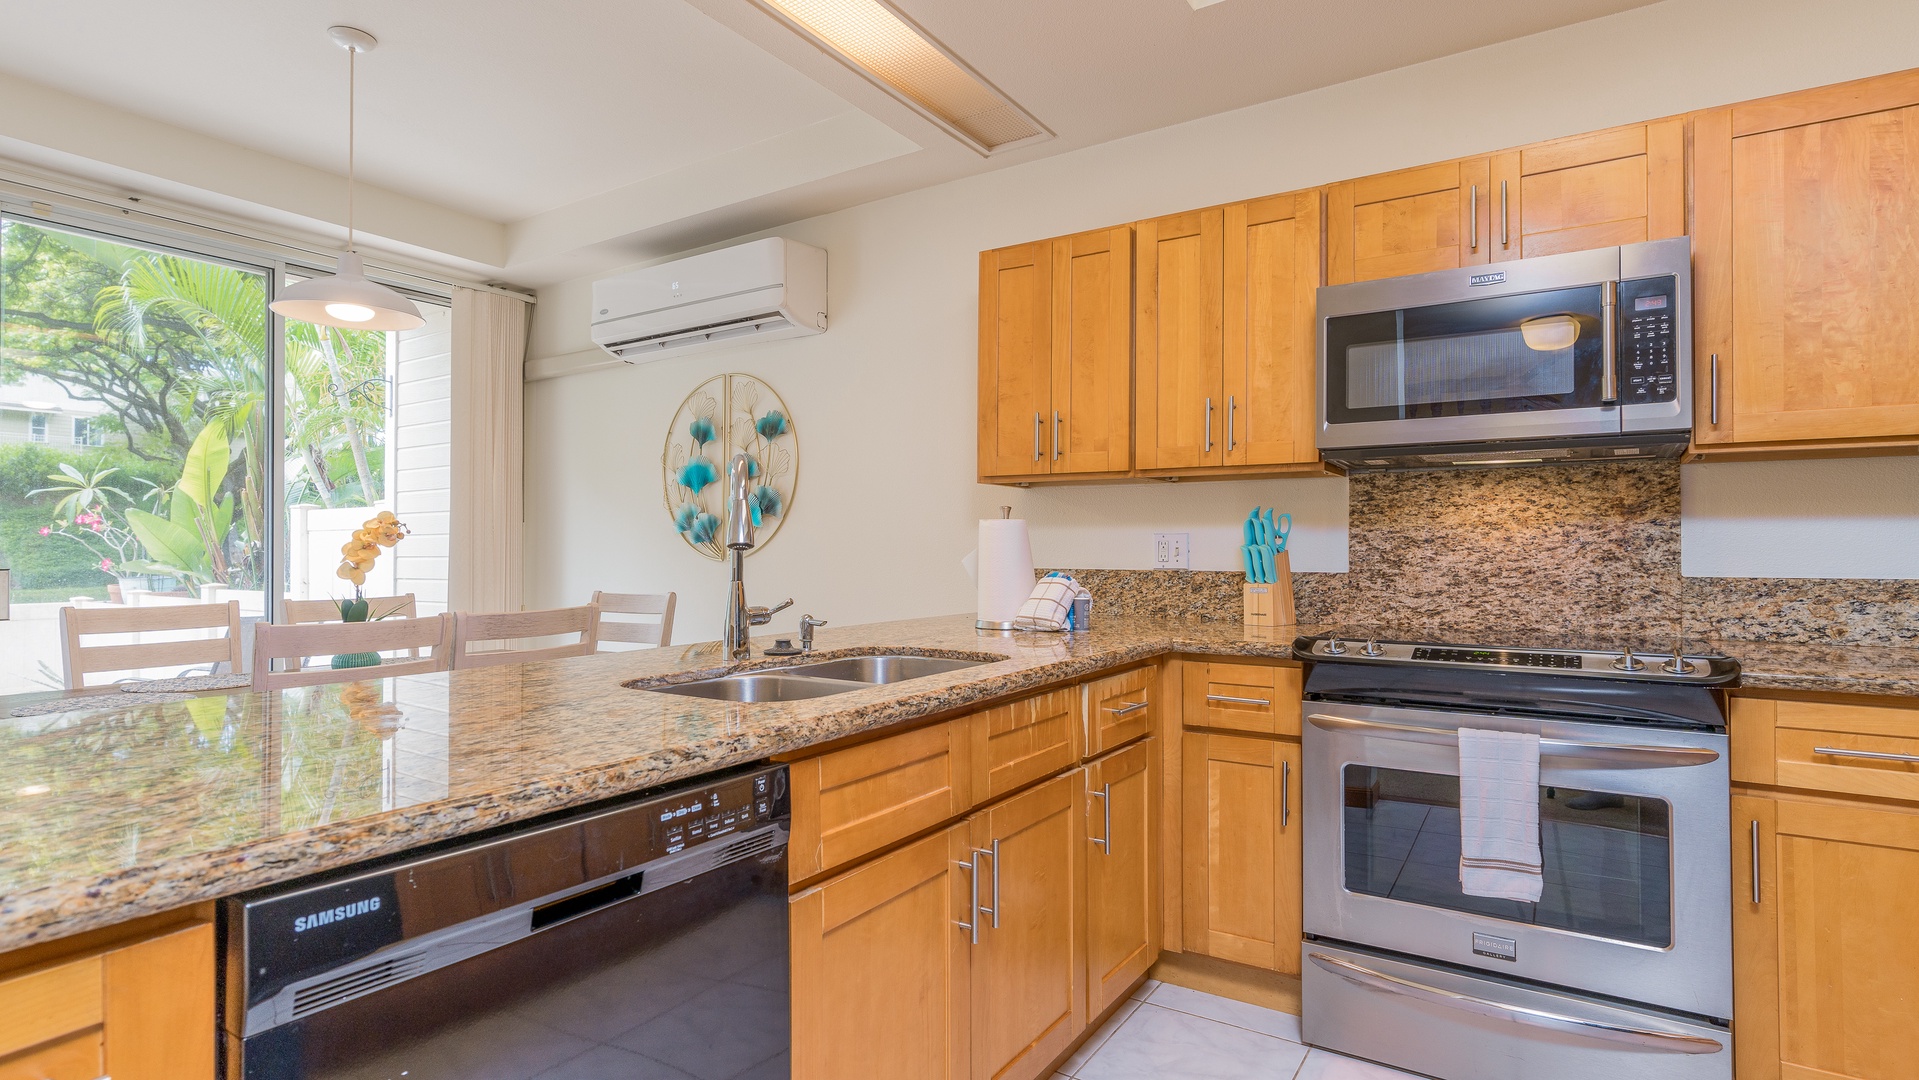 Kapolei Vacation Rentals, Fairways at Ko Olina 27H - The kitchen is open and bright for entertaining.